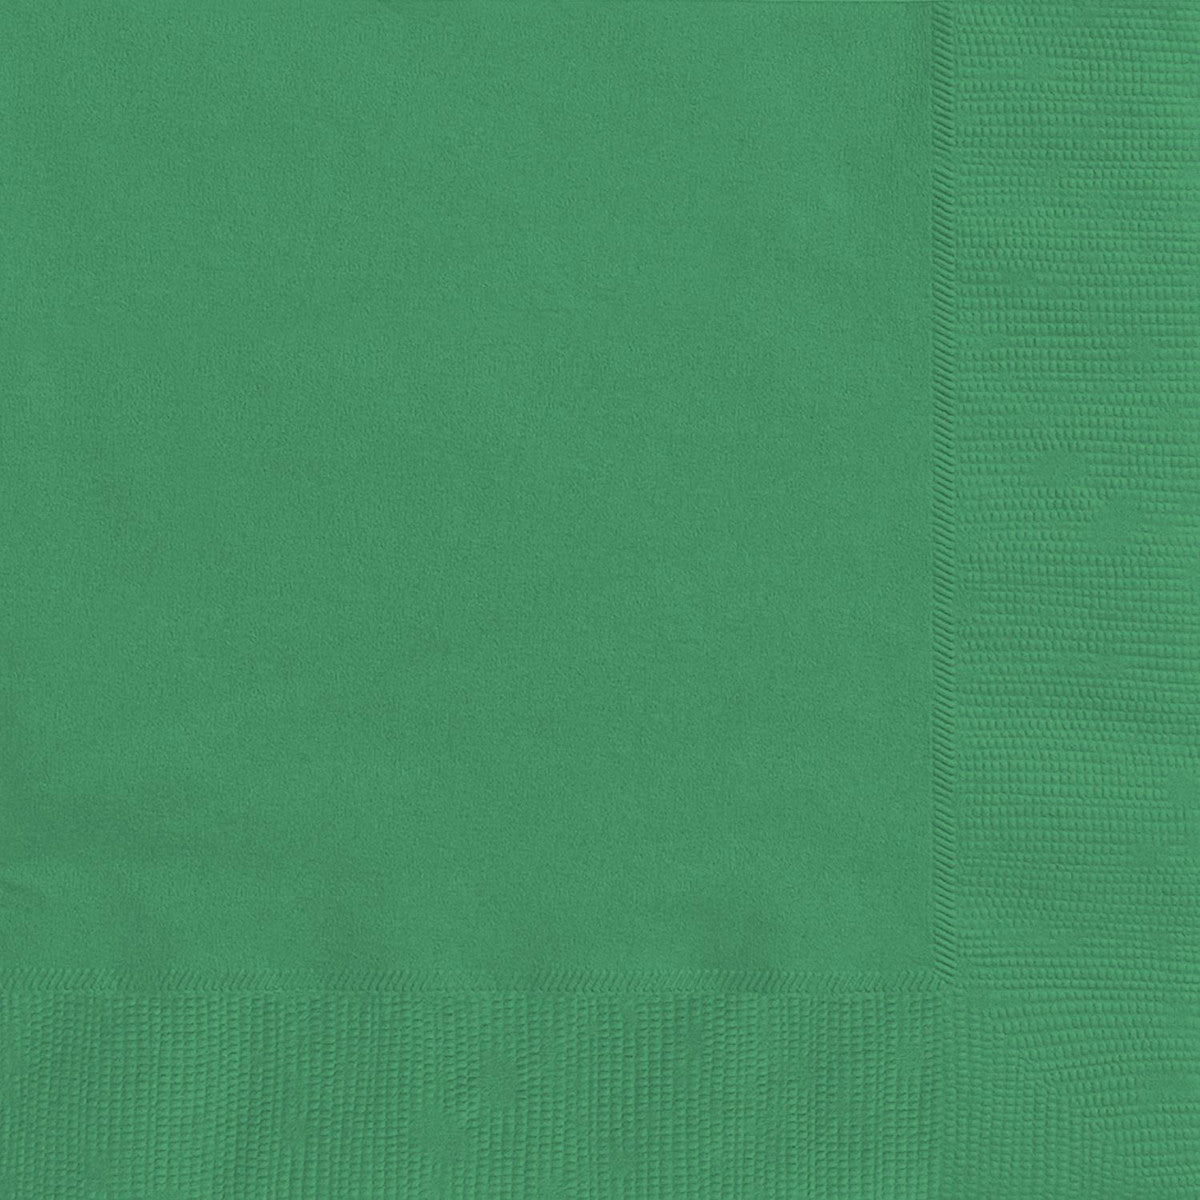 Emerald Green - Lunch Napkins - Dollars and Sense